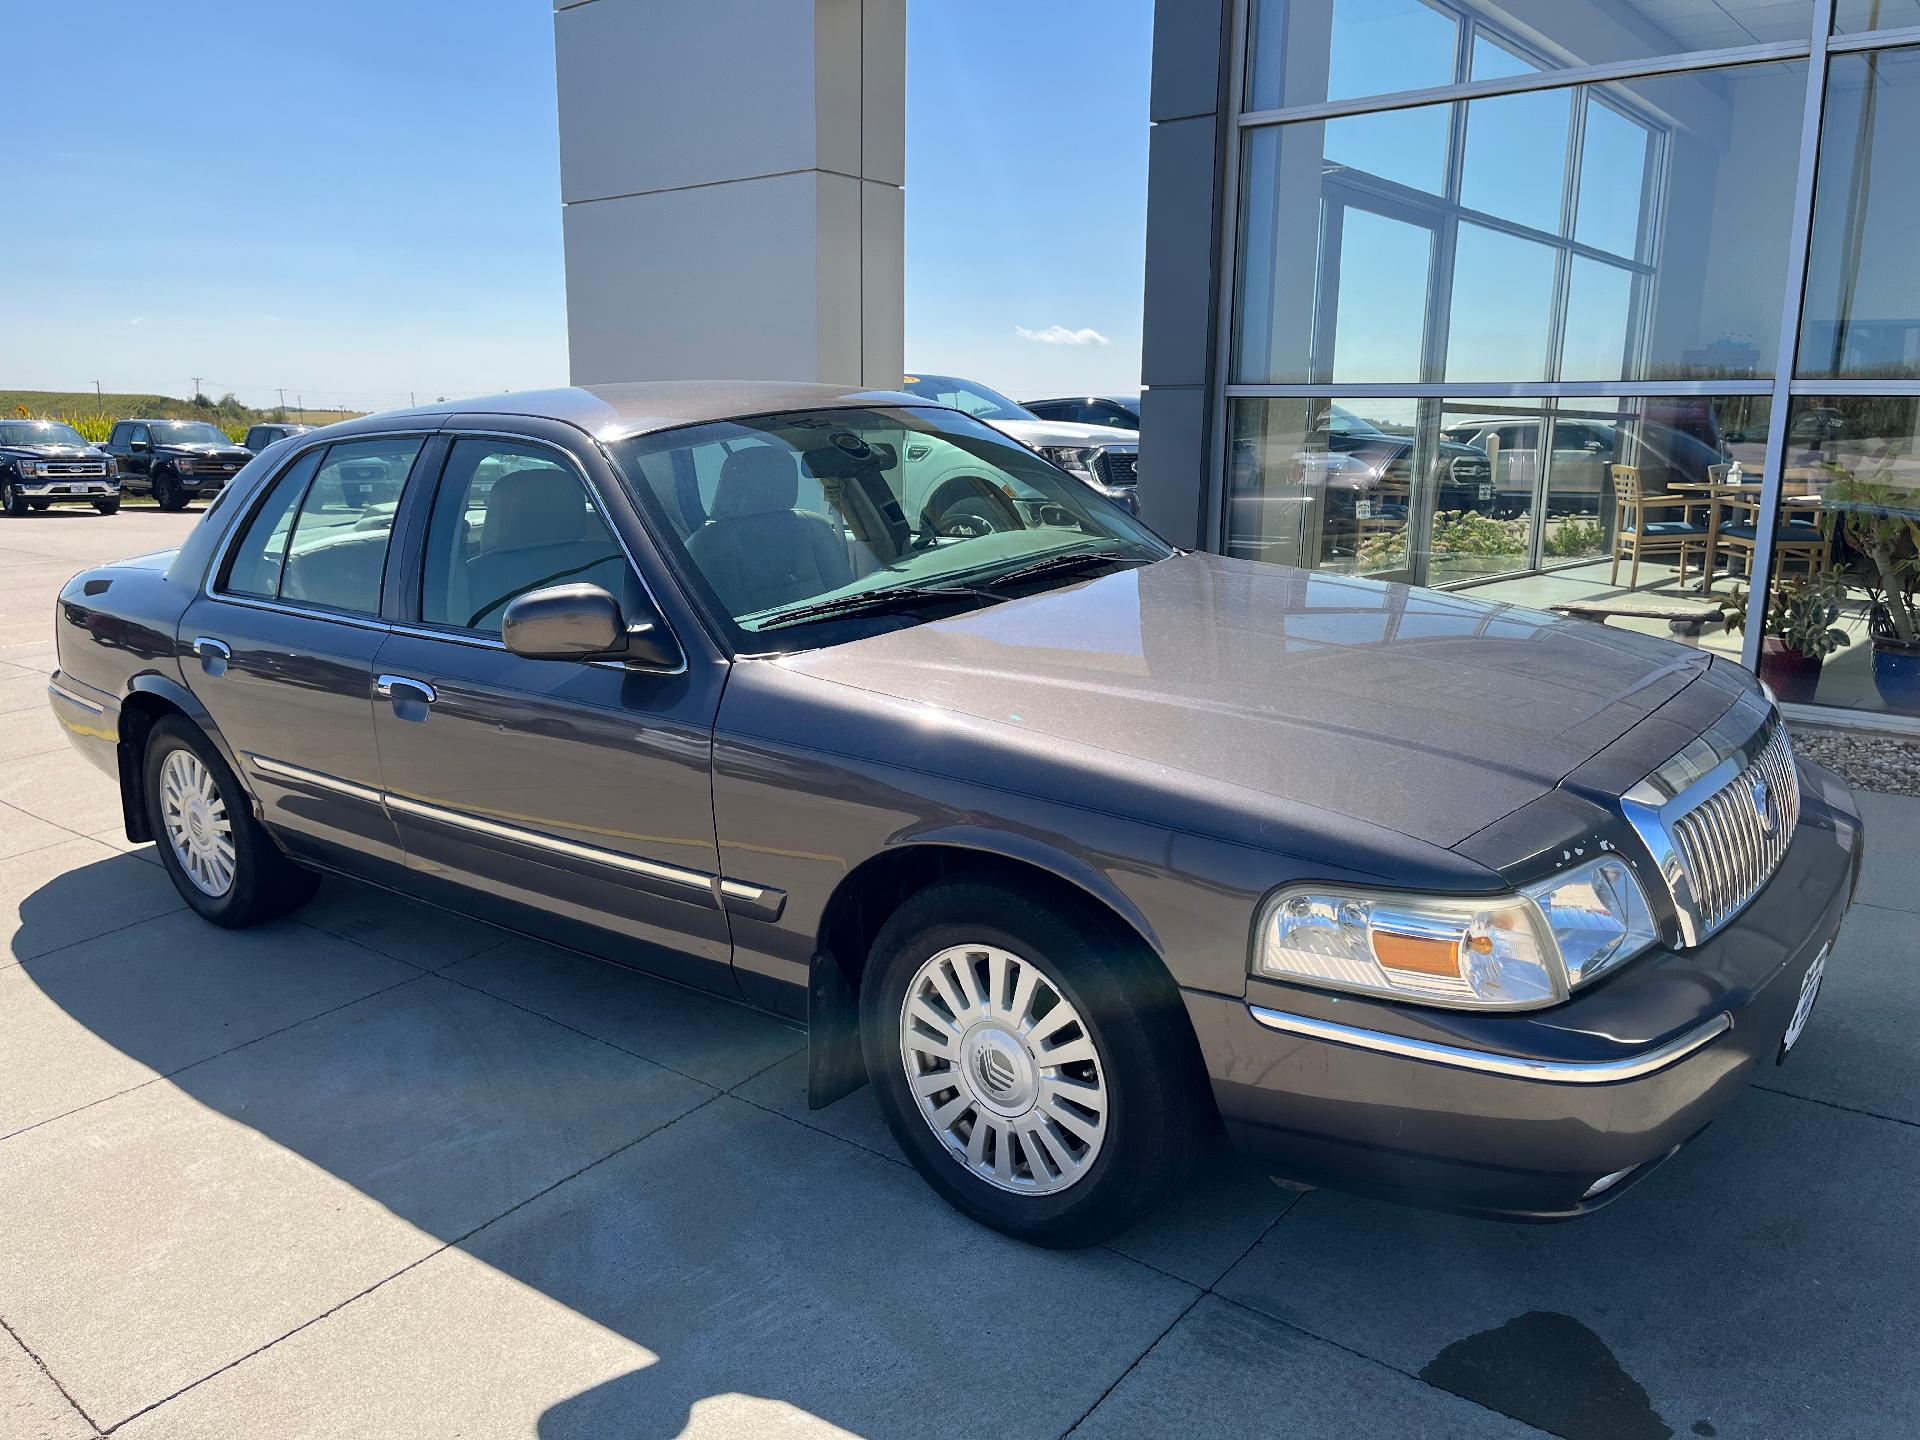 Used 2007 Mercury Grand Marquis LS with VIN 2MEFM75V17X612455 for sale in Tipton, IA